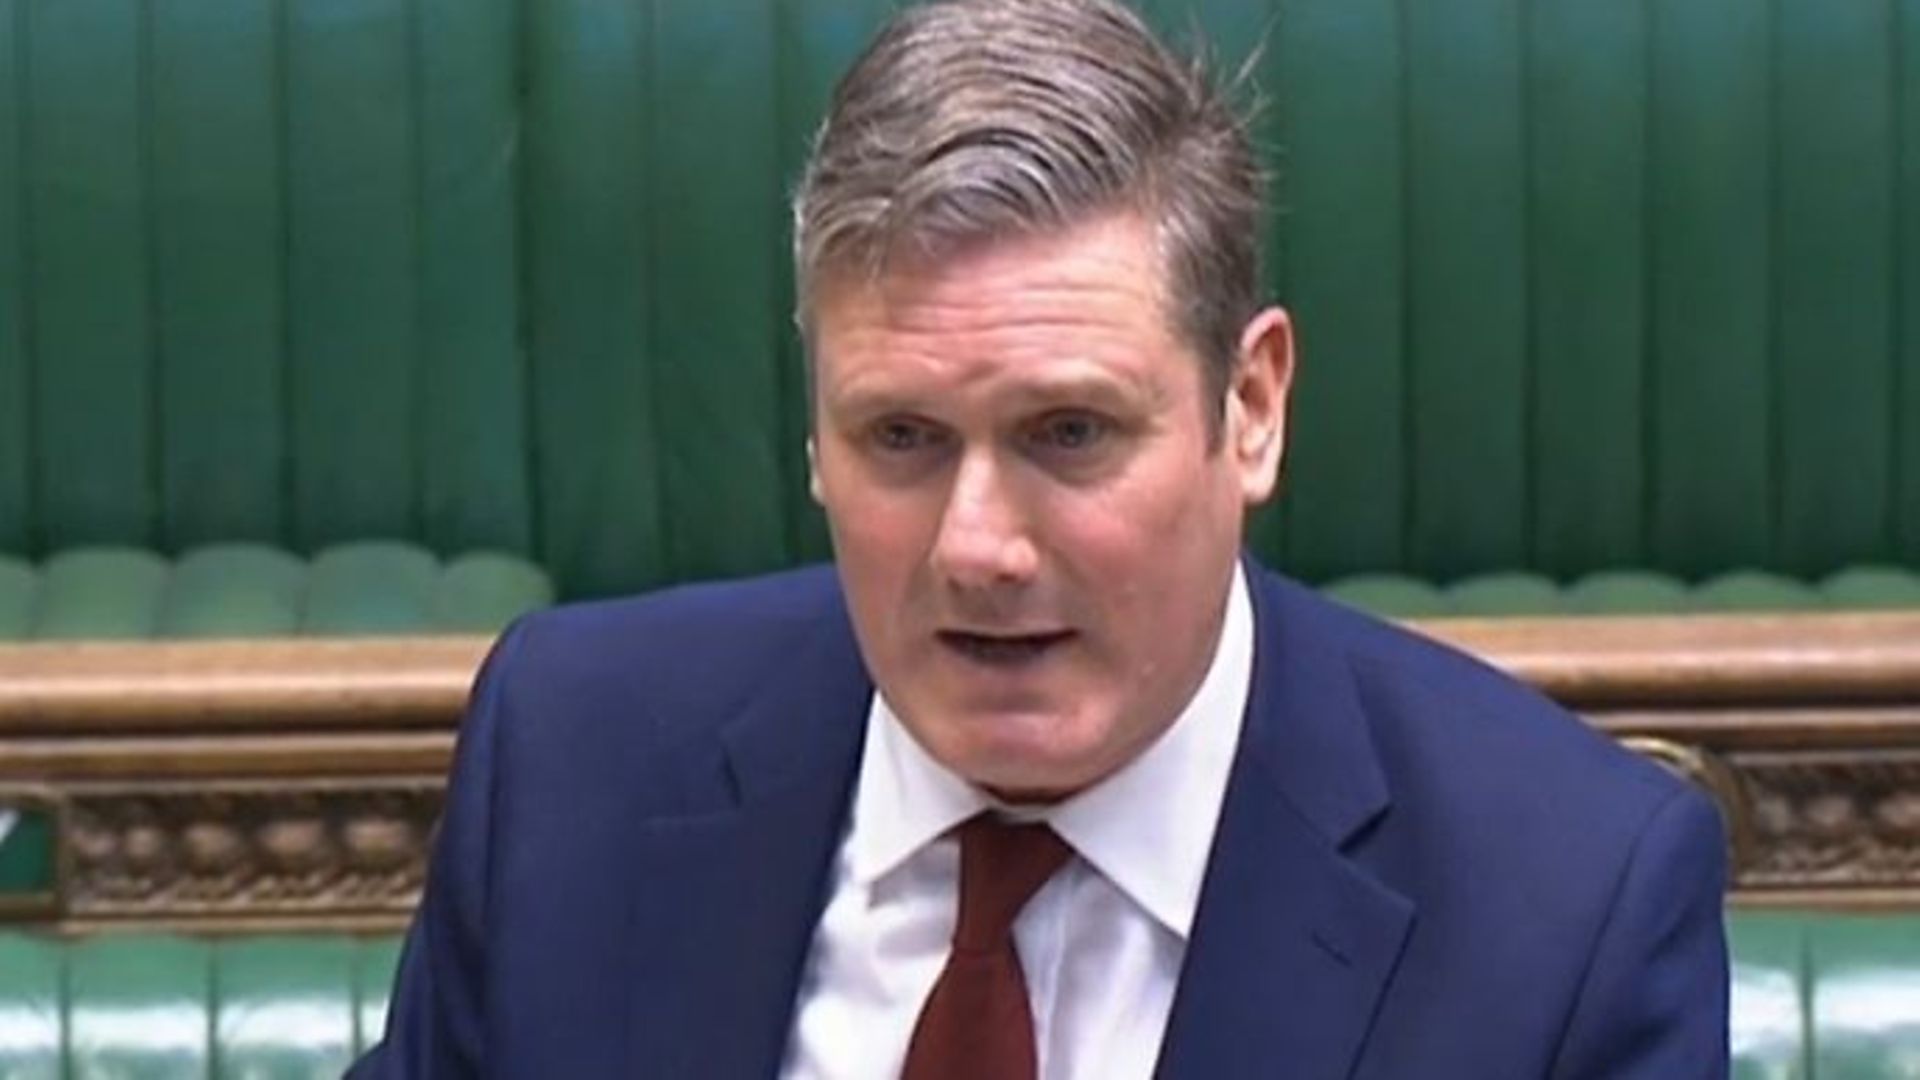 Sir Keir Starmer during Prime Minister's Questions - Credit: Parliamentlive.tv